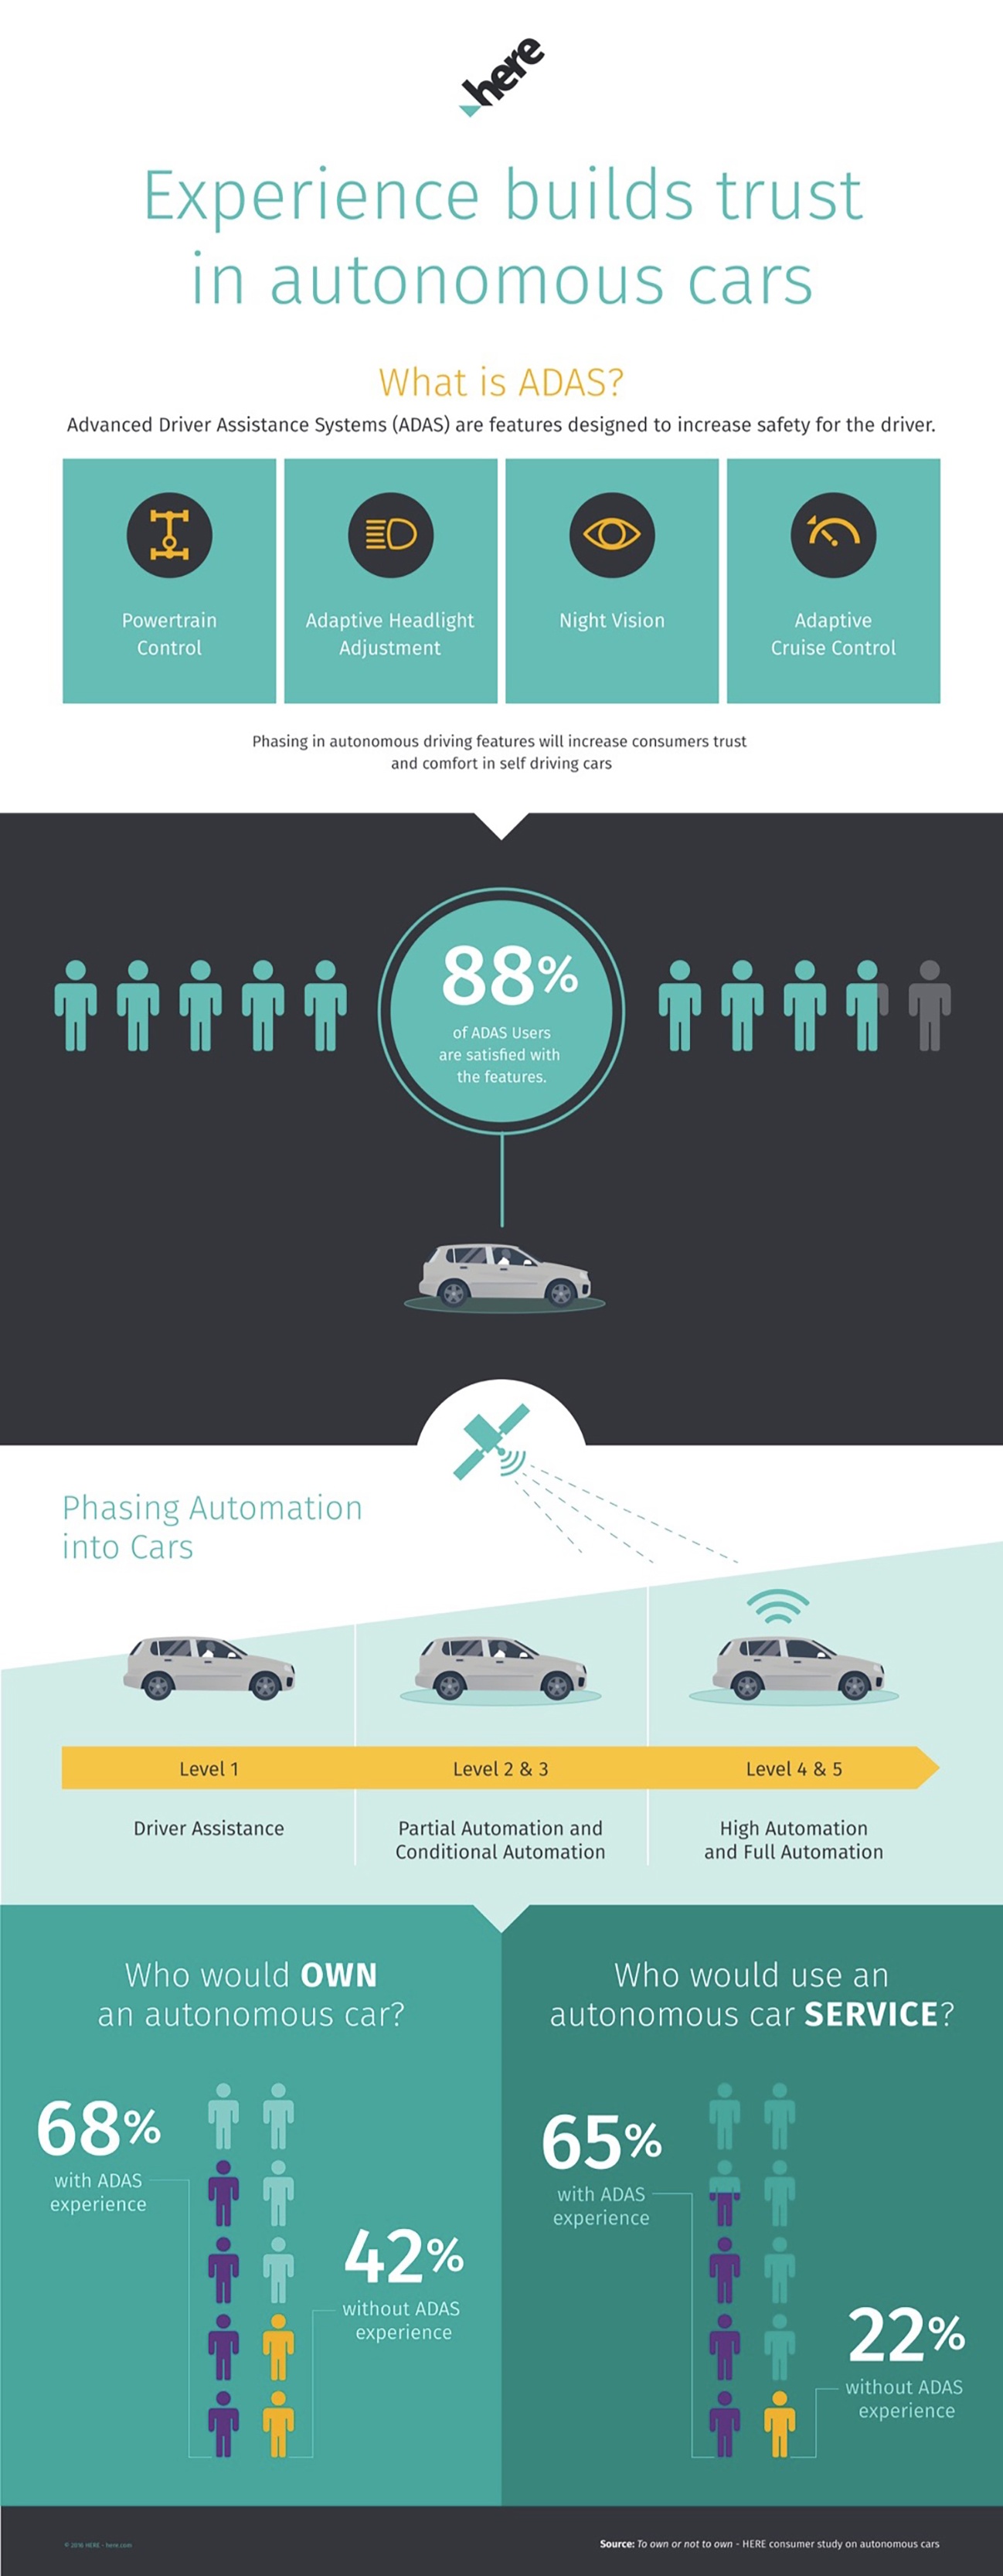 HRE1695-Infographic-ADAS-Users-011617-B